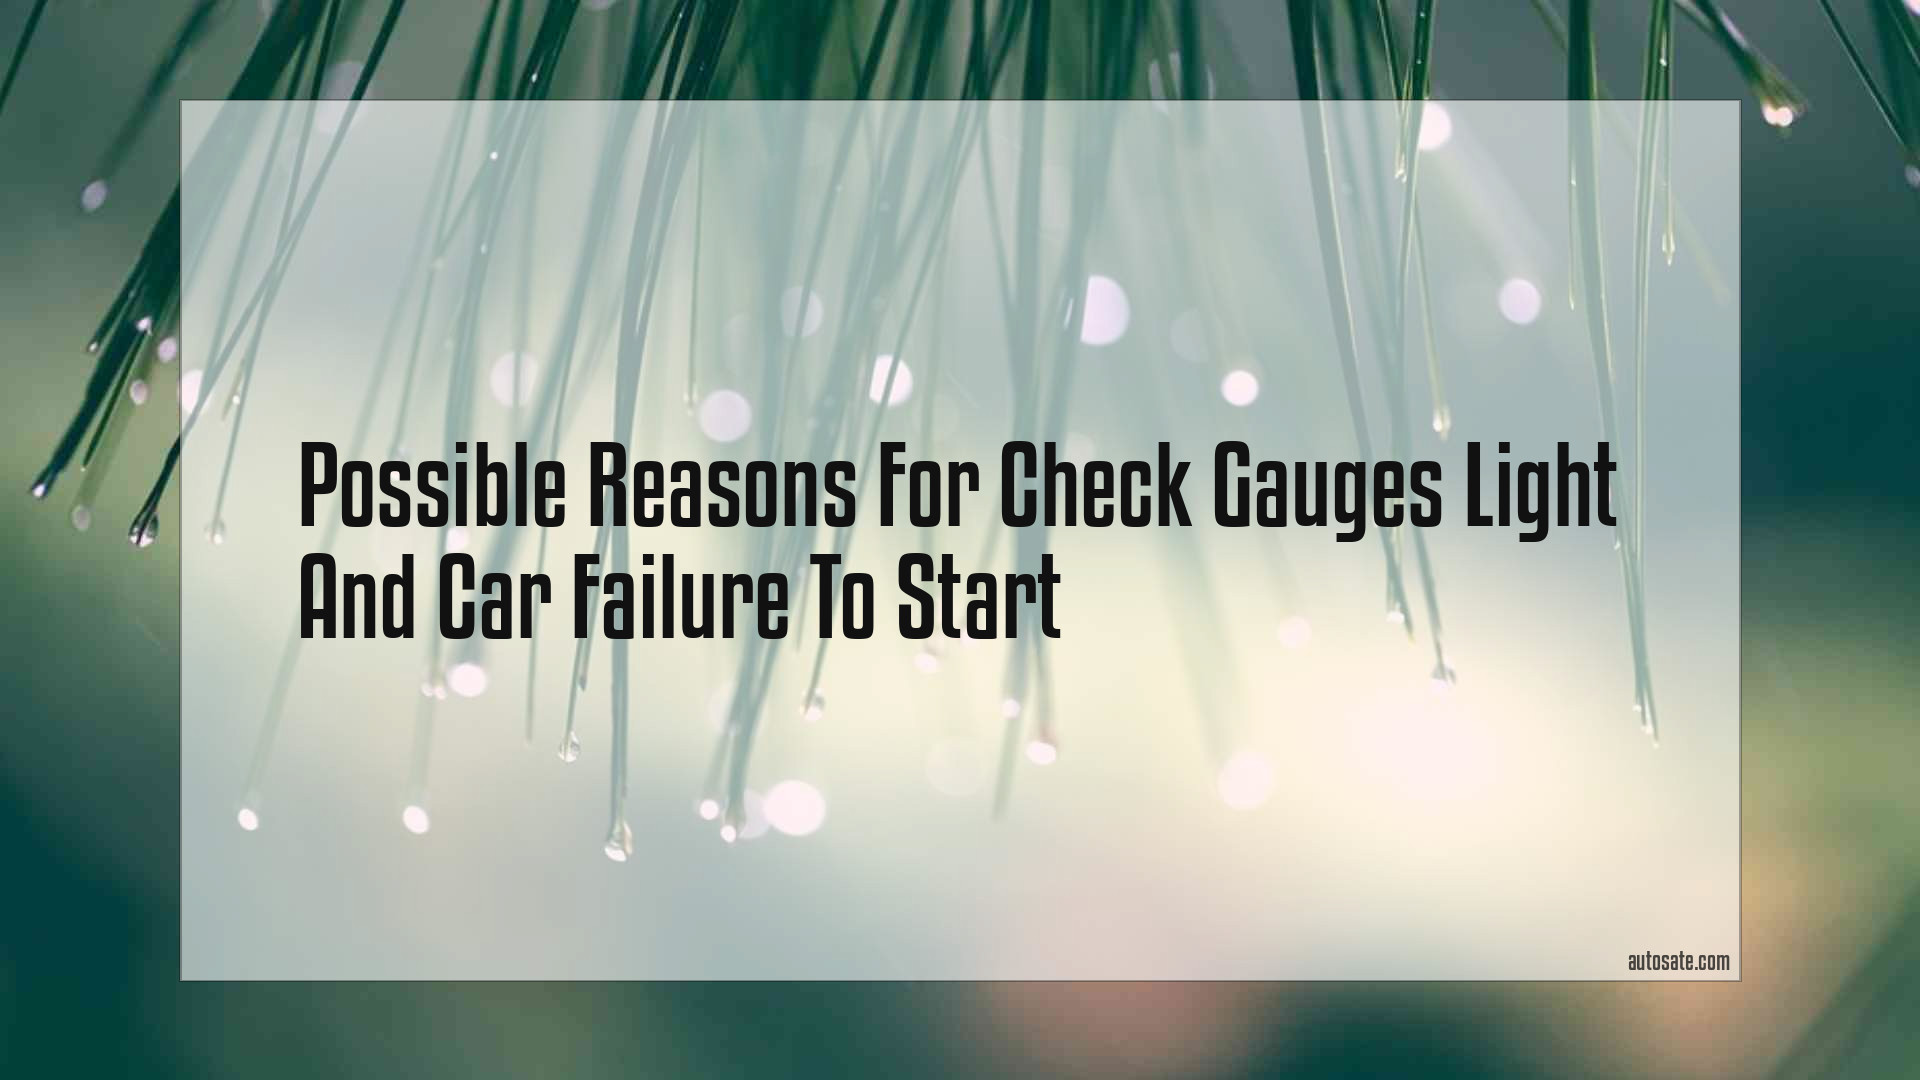 Possible Reasons For Check Gauges Light And Car Failure To Start